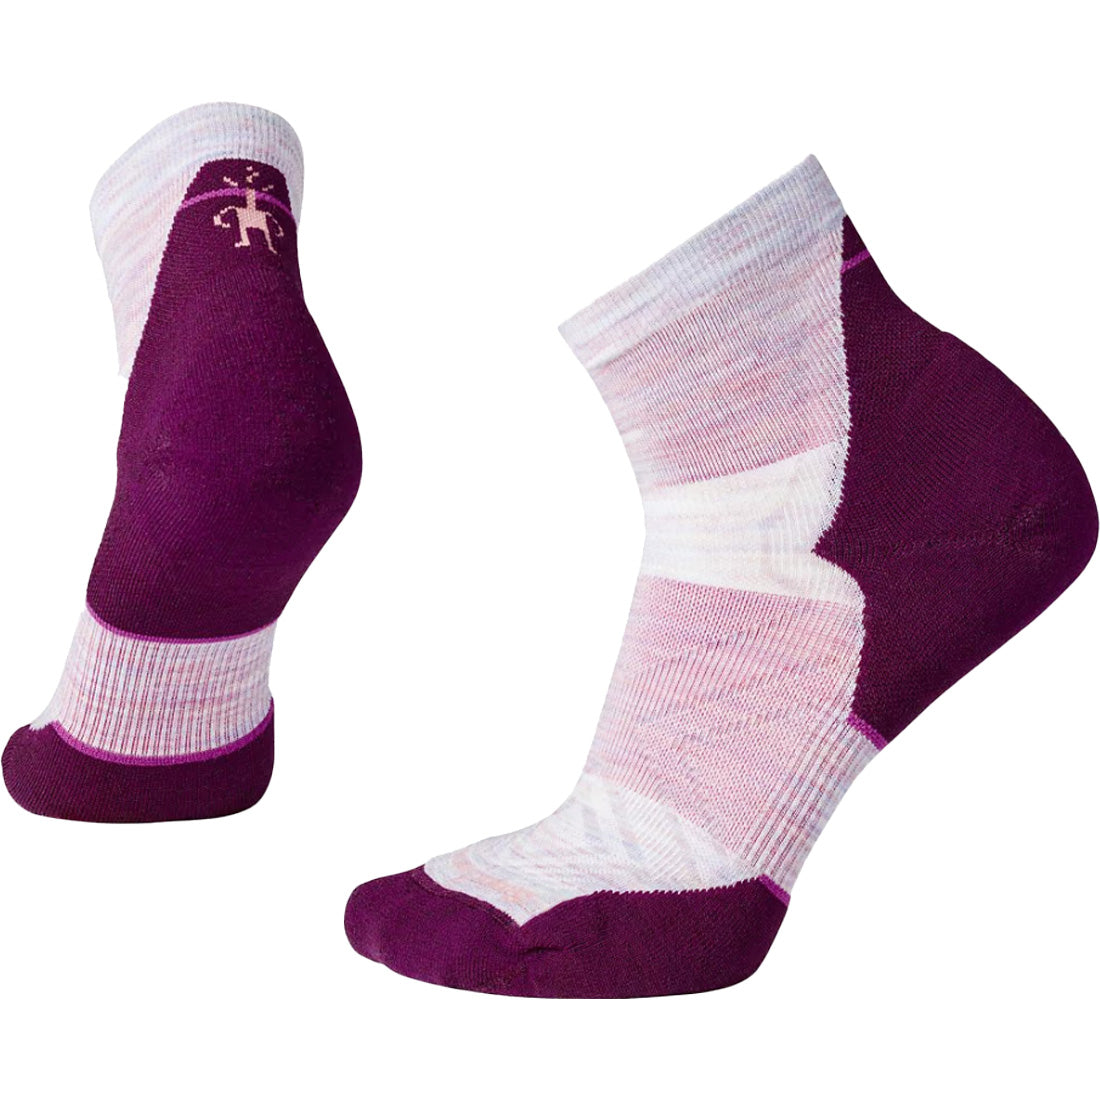 Smartwool Run Targeted Cushion Ankle Sock - Women's